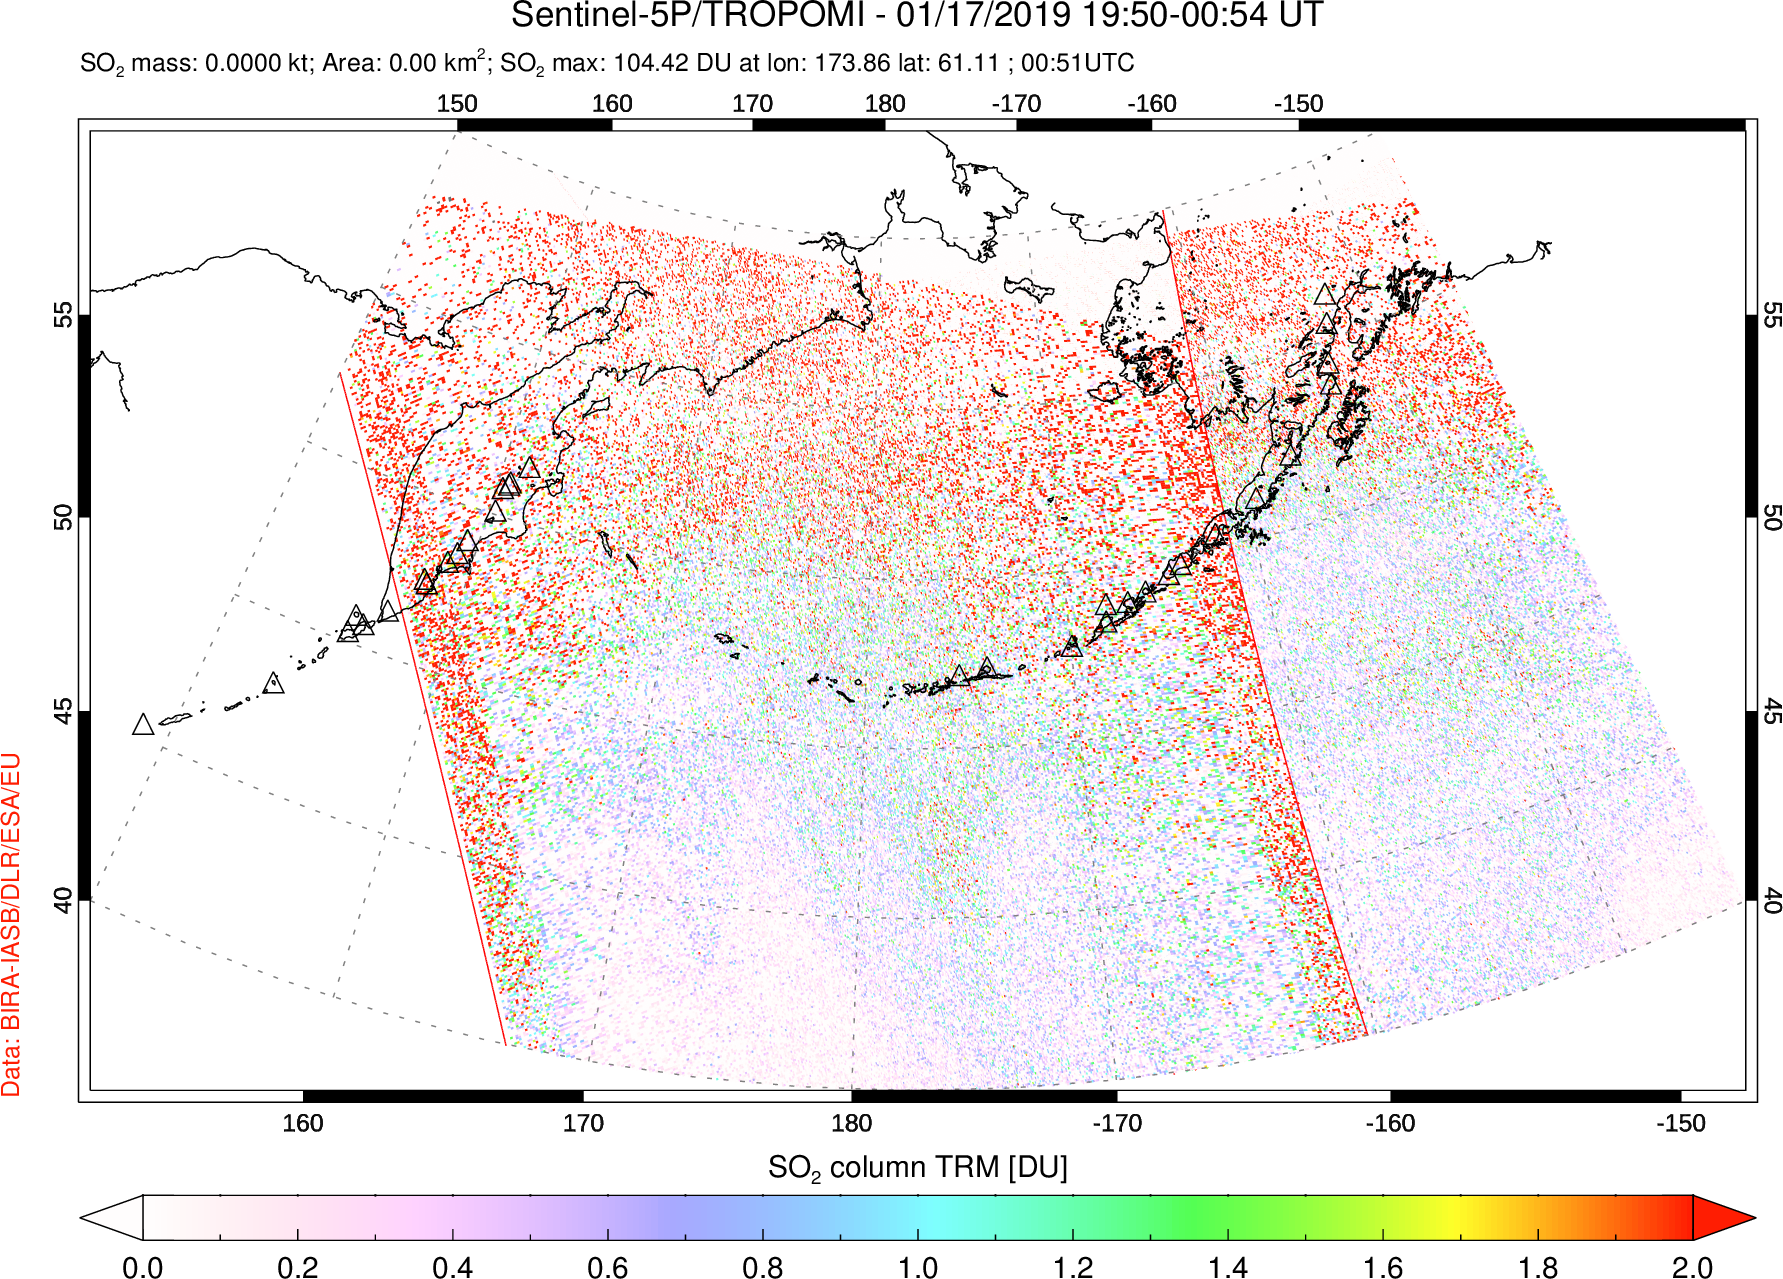 A sulfur dioxide image over North Pacific on Jan 17, 2019.